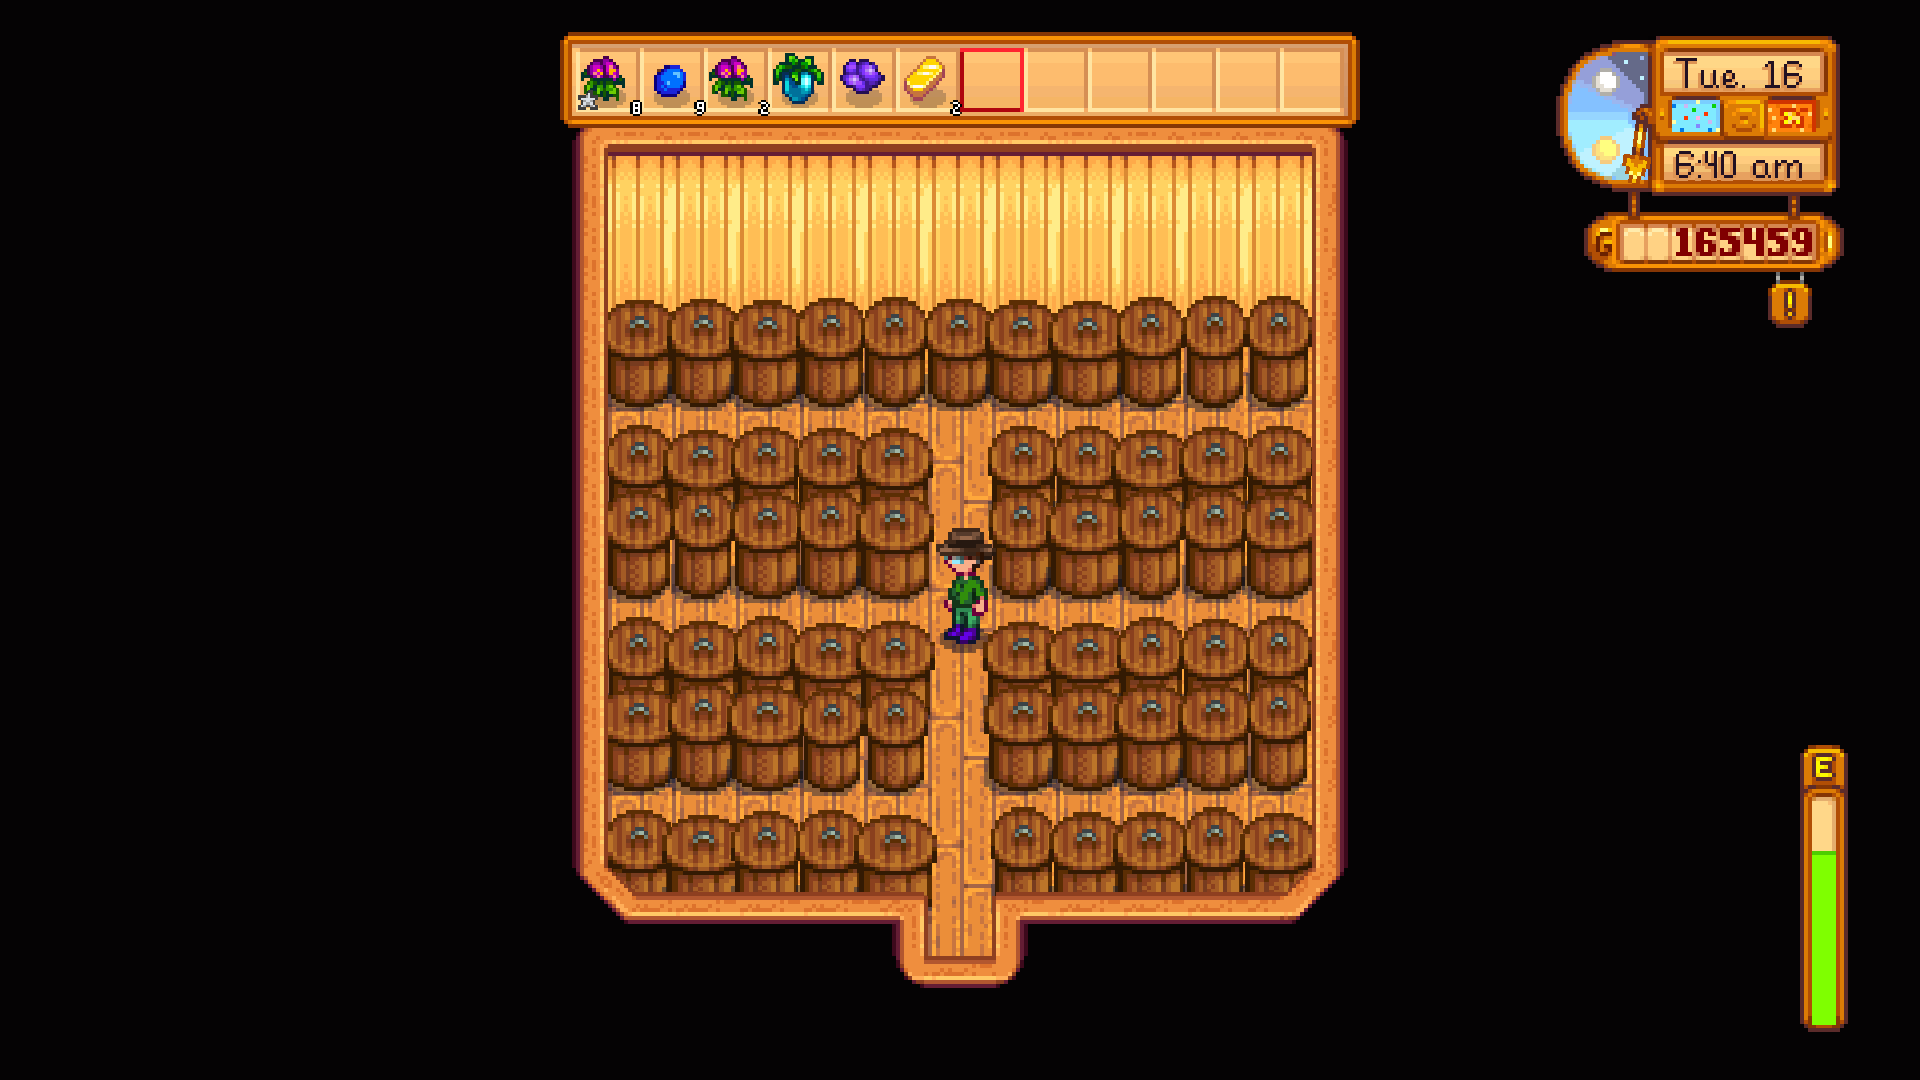 stardewvalley_2018082nwcs4.png